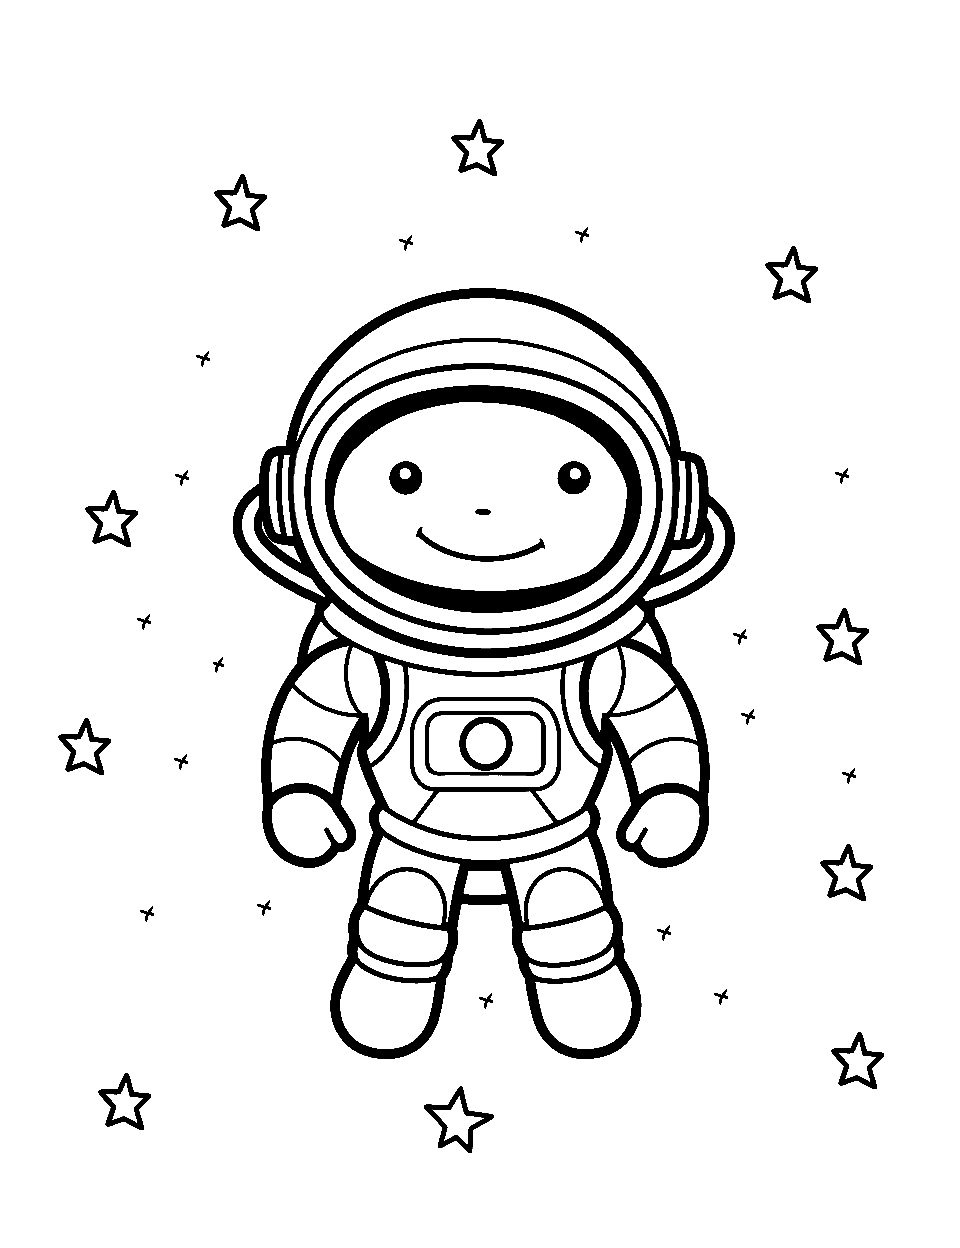 Finished coloring this little astronaut dude and a few oth… | Flickr